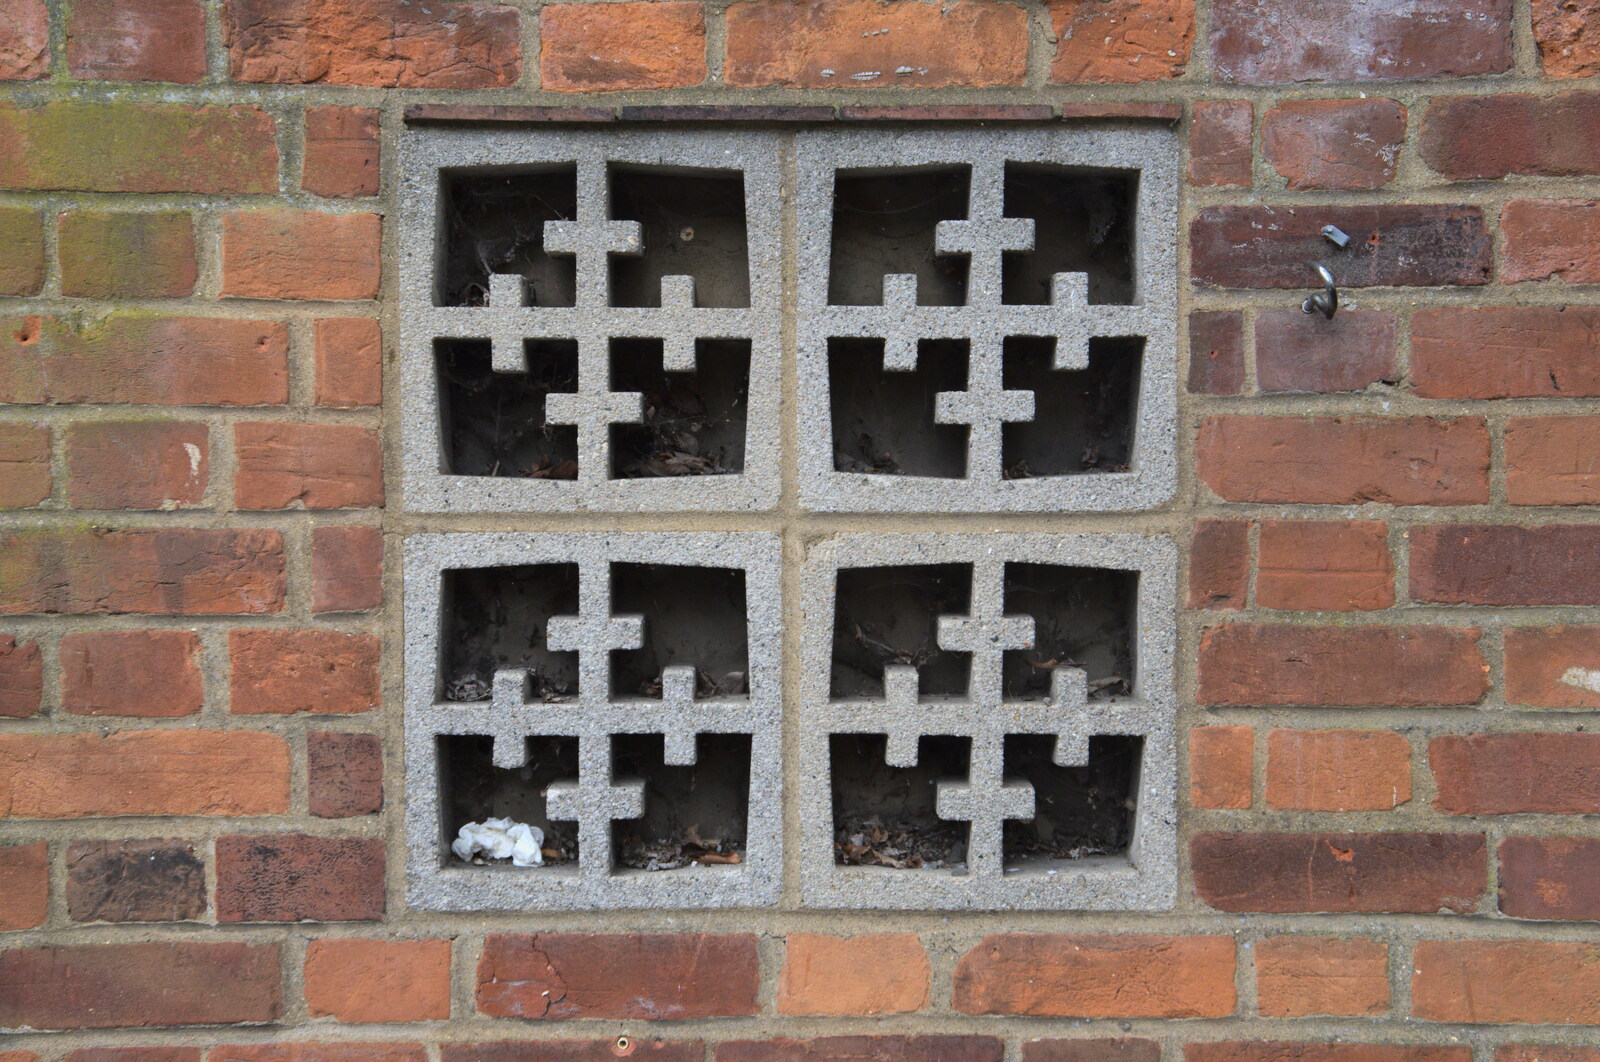 Patterned blocks in a wall from Fred's Flute Exam, Ipswich, Suffolk - 5th March 2020